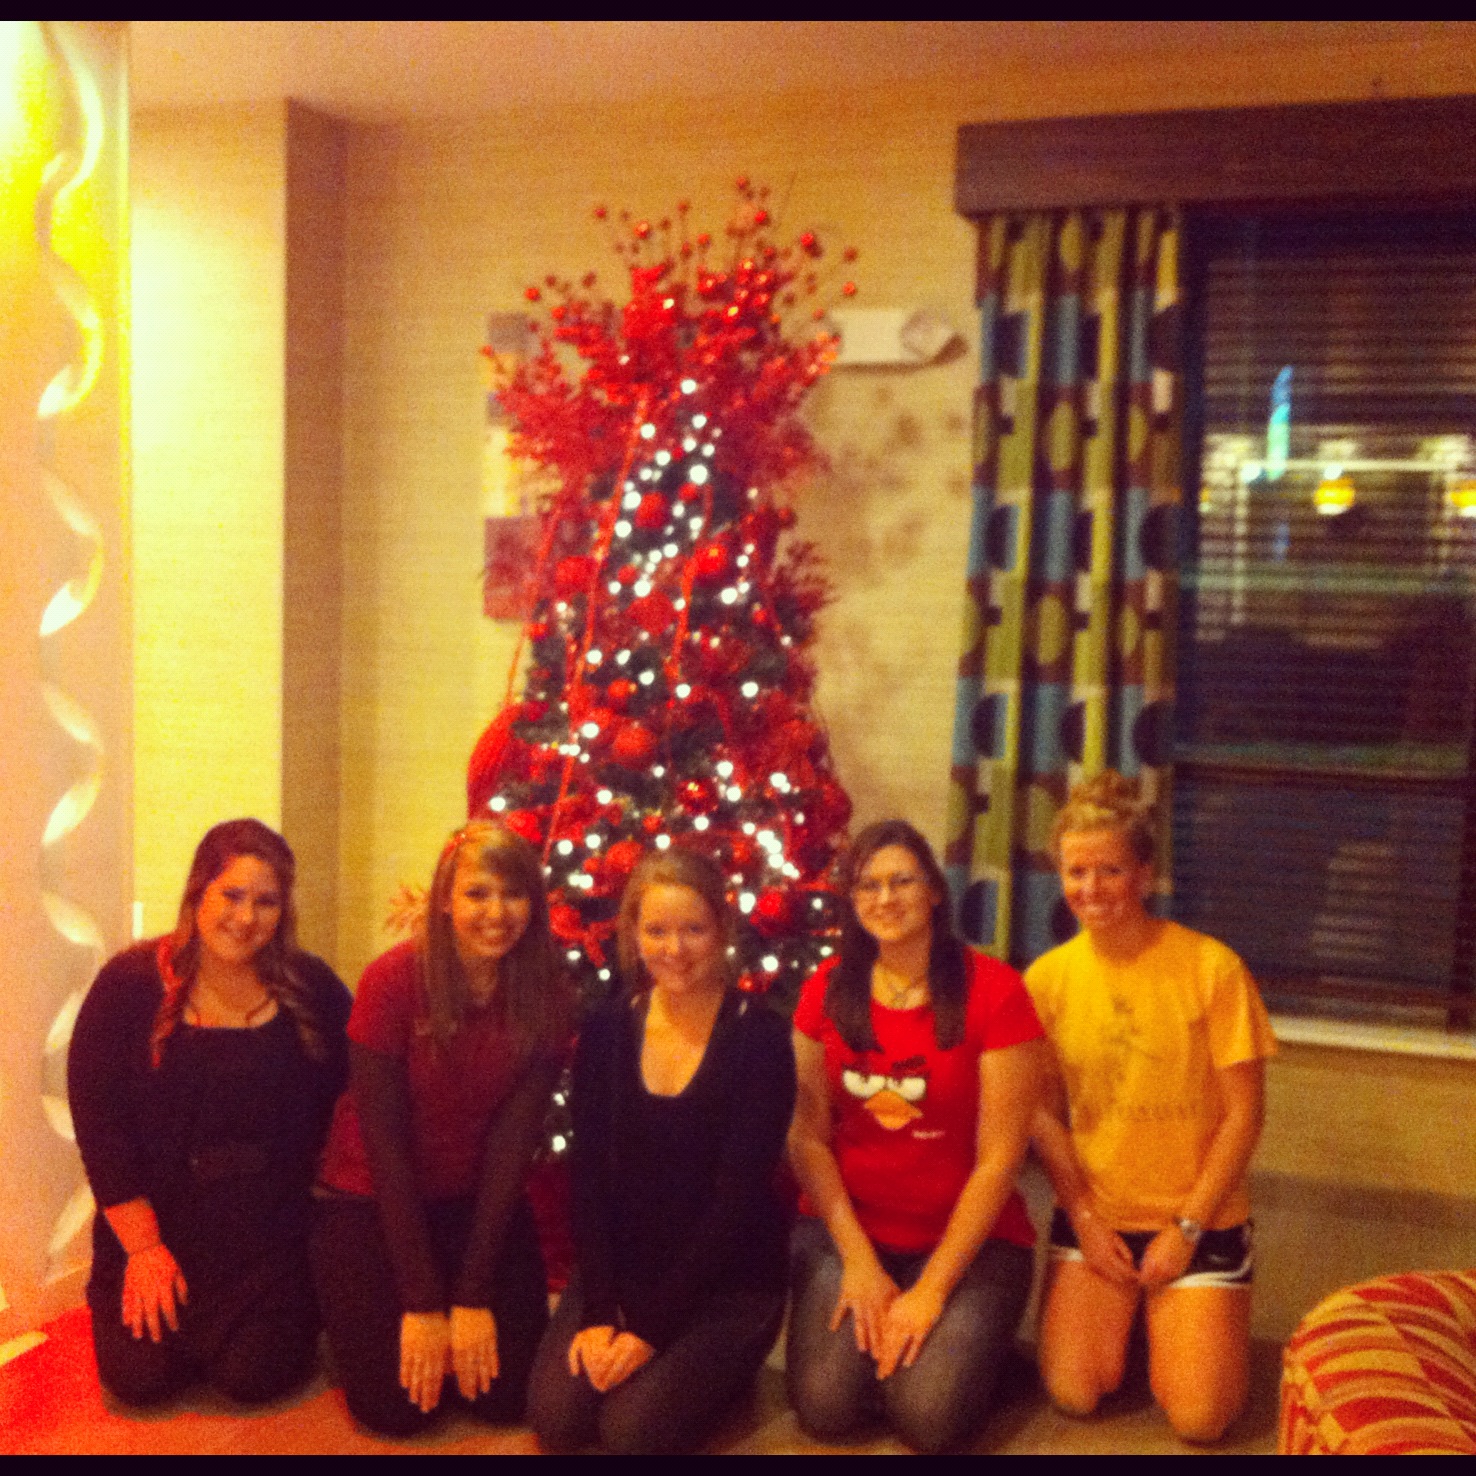 Some of our wonderful staff helping decorate the tree